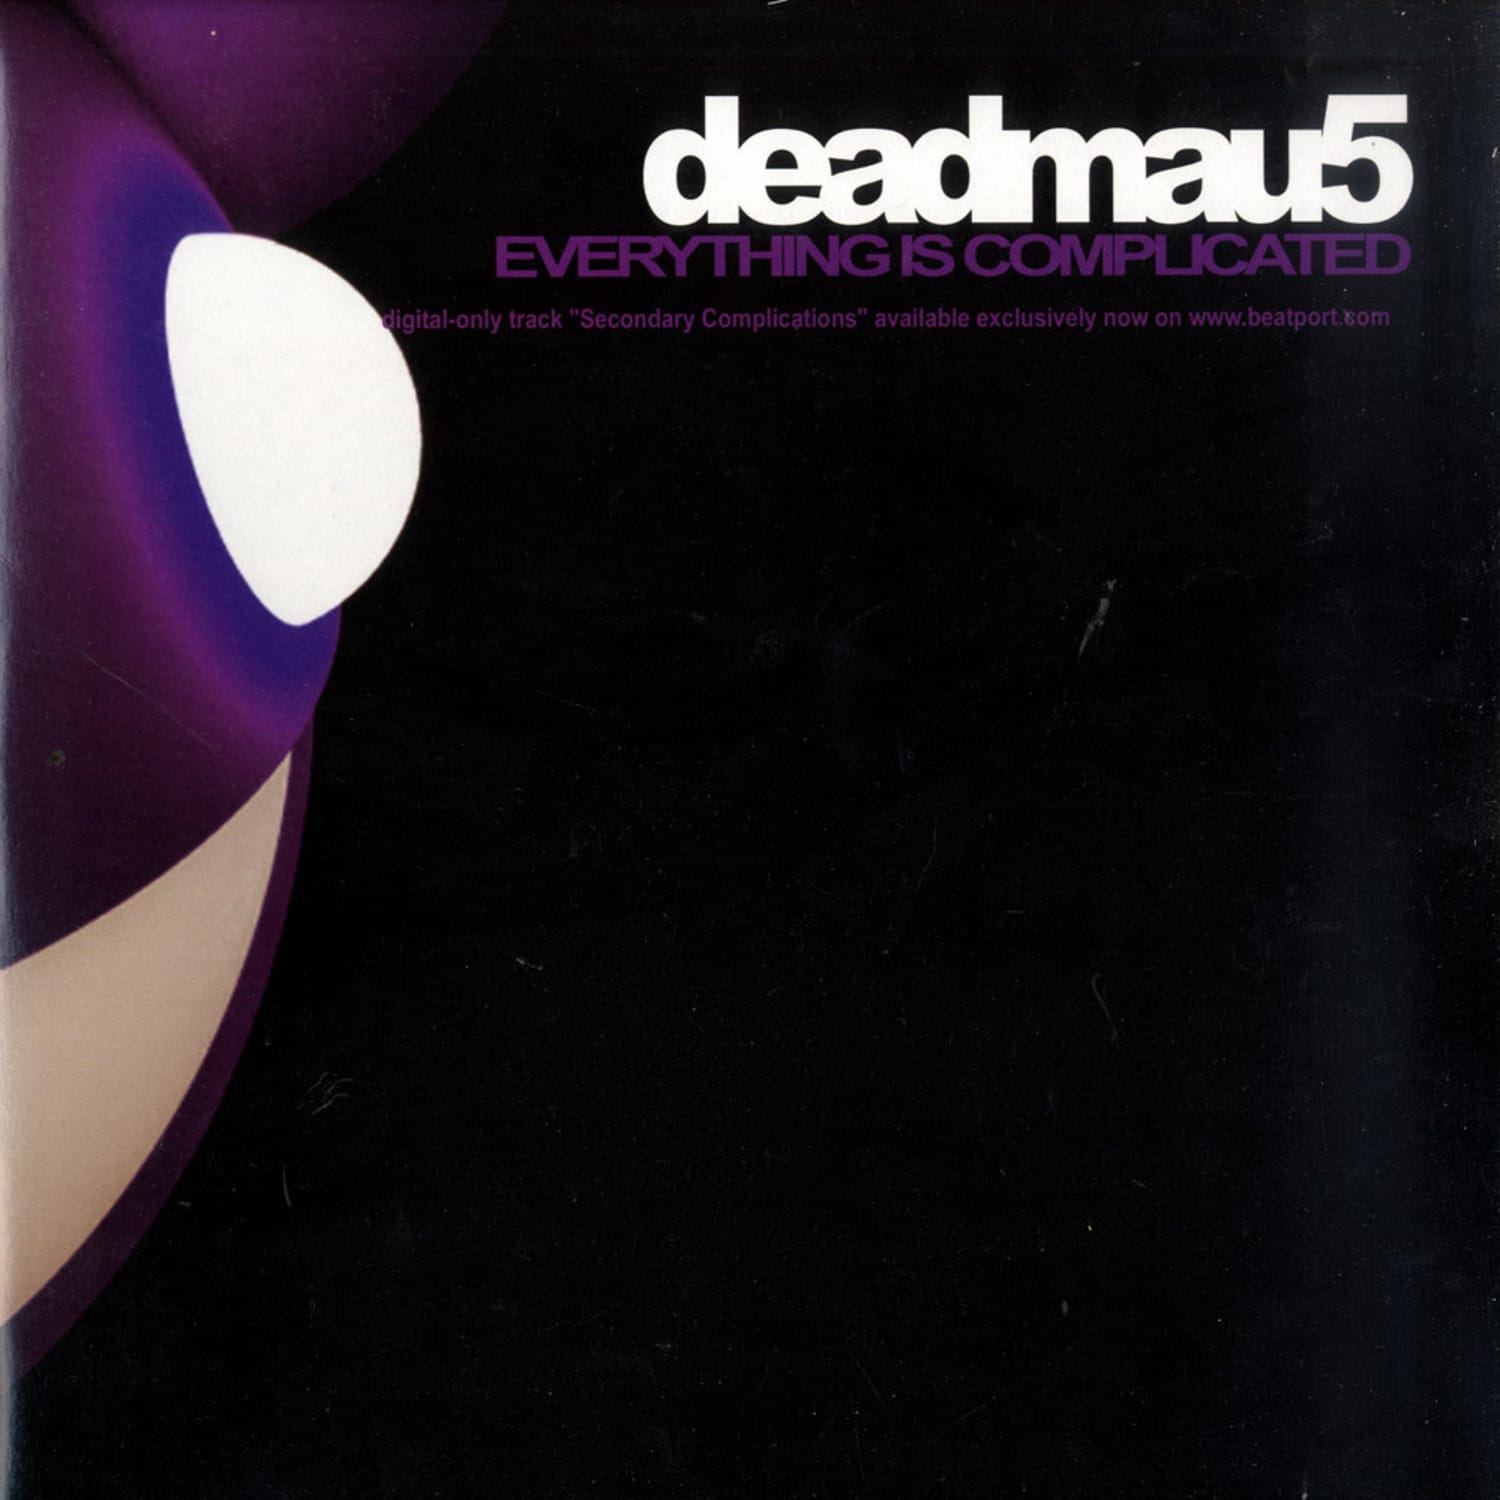 Deadmau5 - EVERYTHINGS COMPLICATED